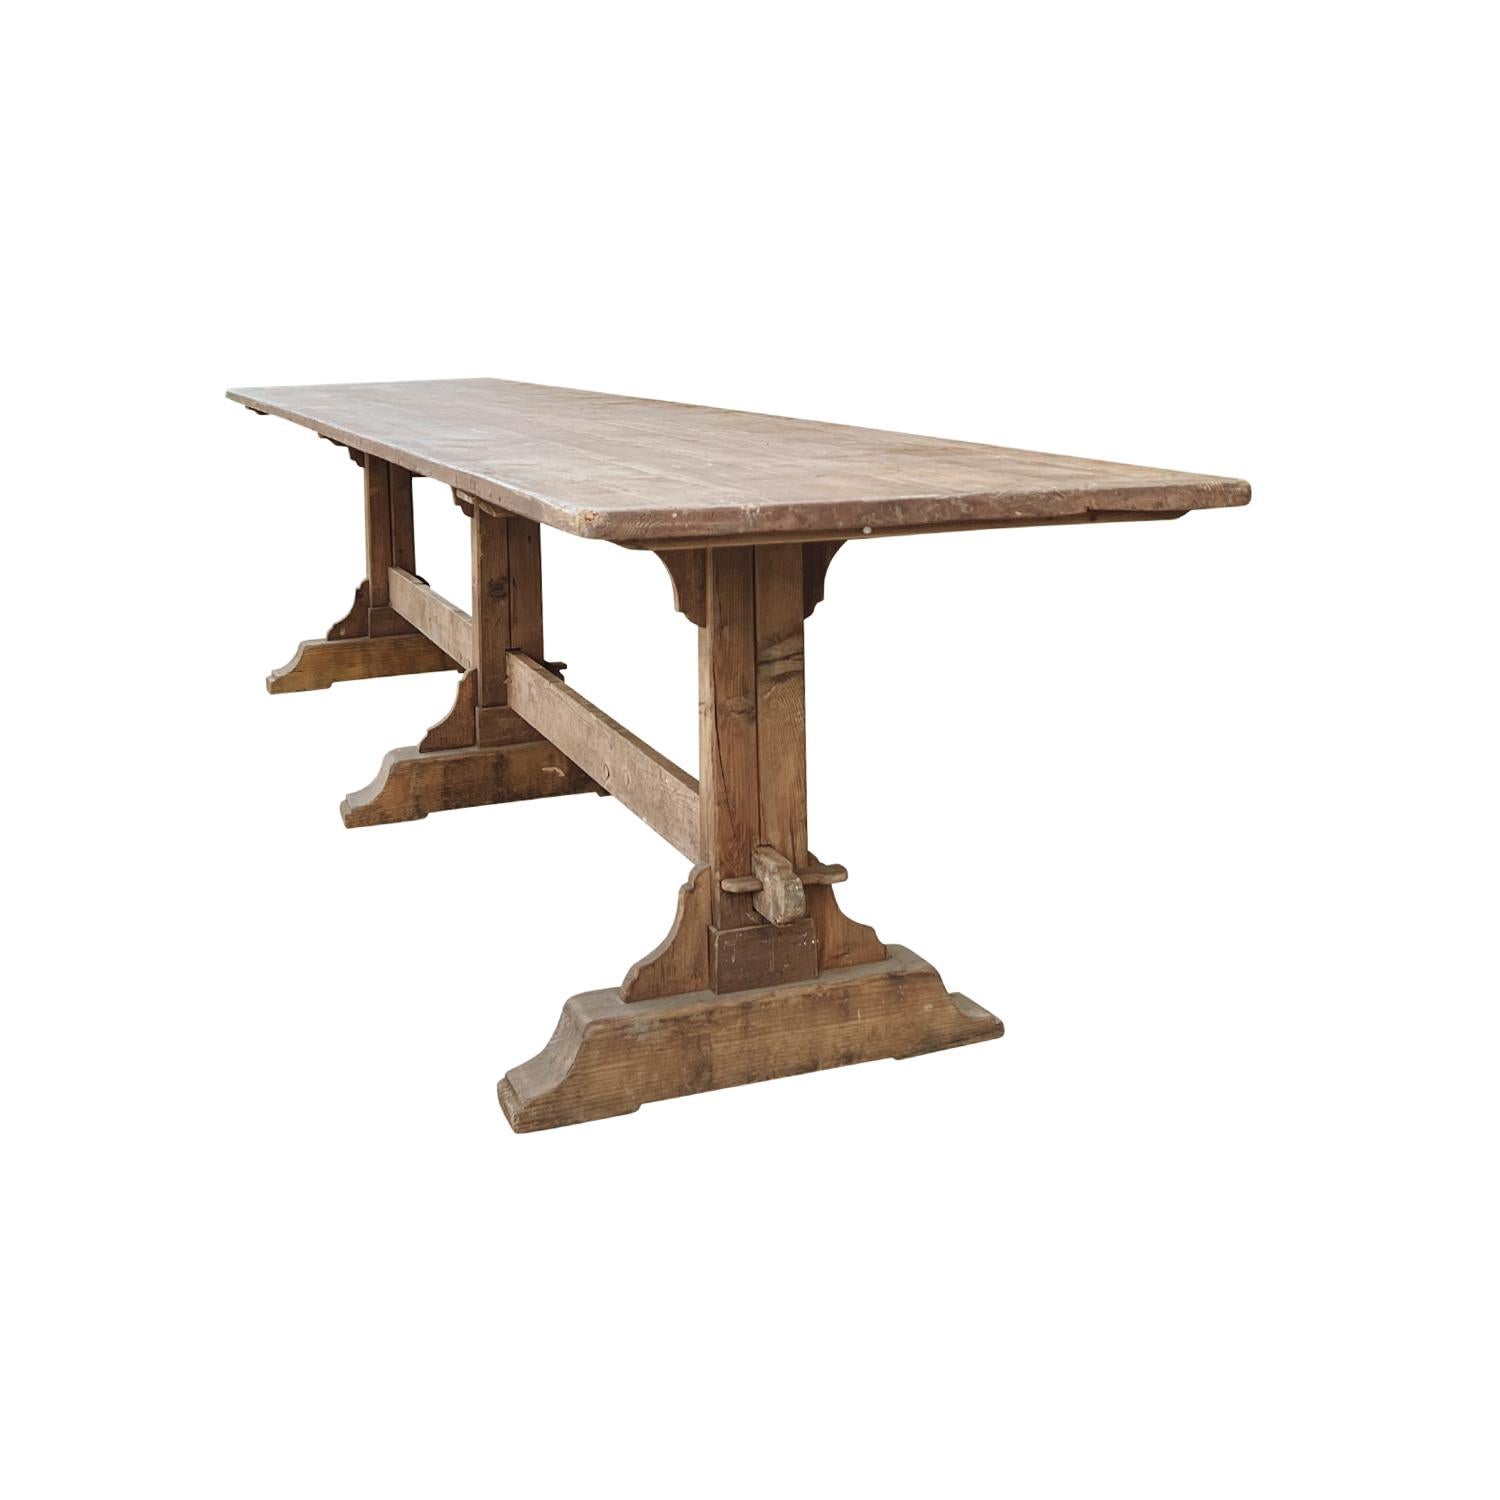 19th Century French Pinewood Trestle Table - Antique Dining Room Table In Good Condition For Sale In West Palm Beach, FL